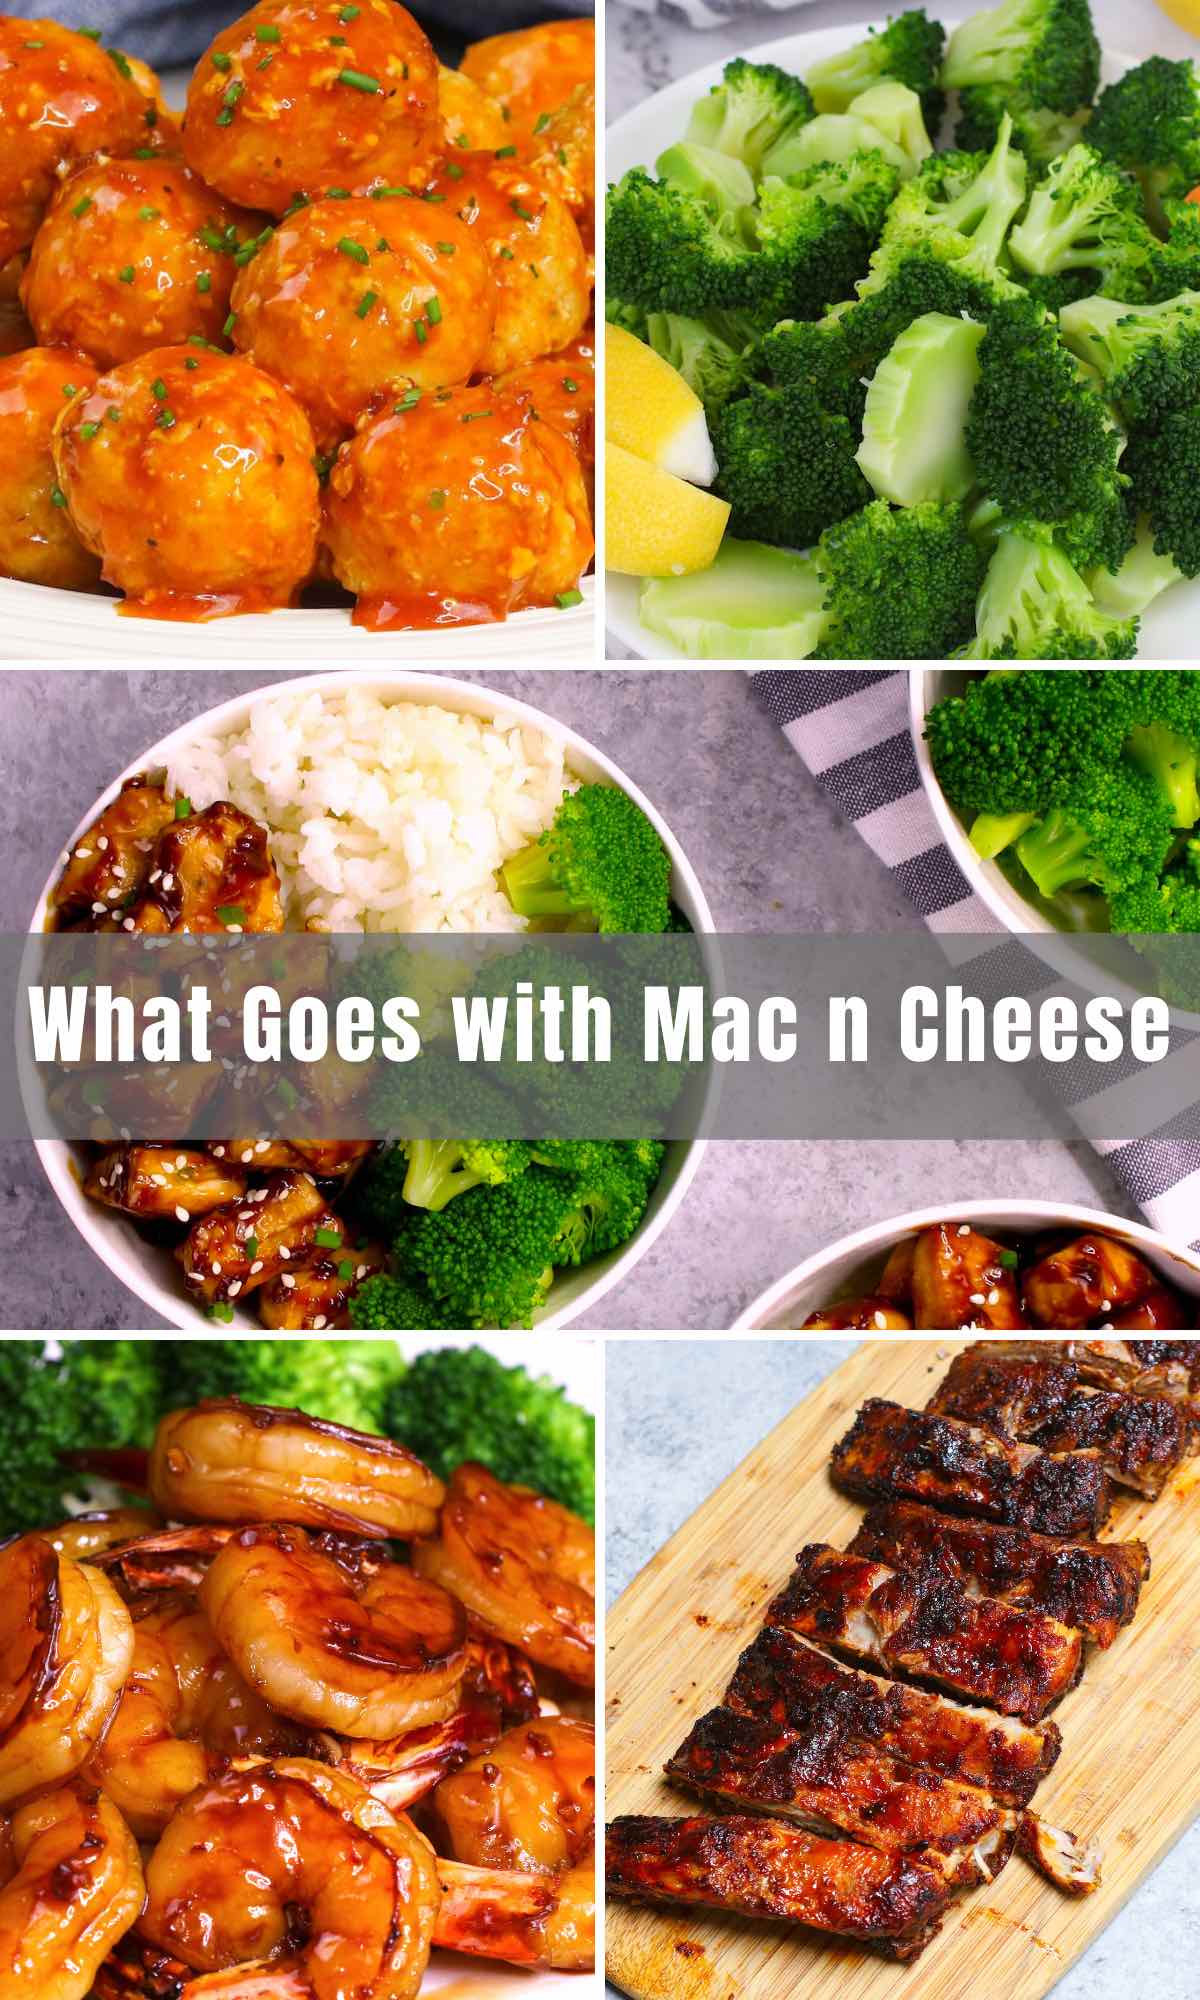 Goes with Mac and Cheese Side Dishes to Eat with Mac n Cheese)